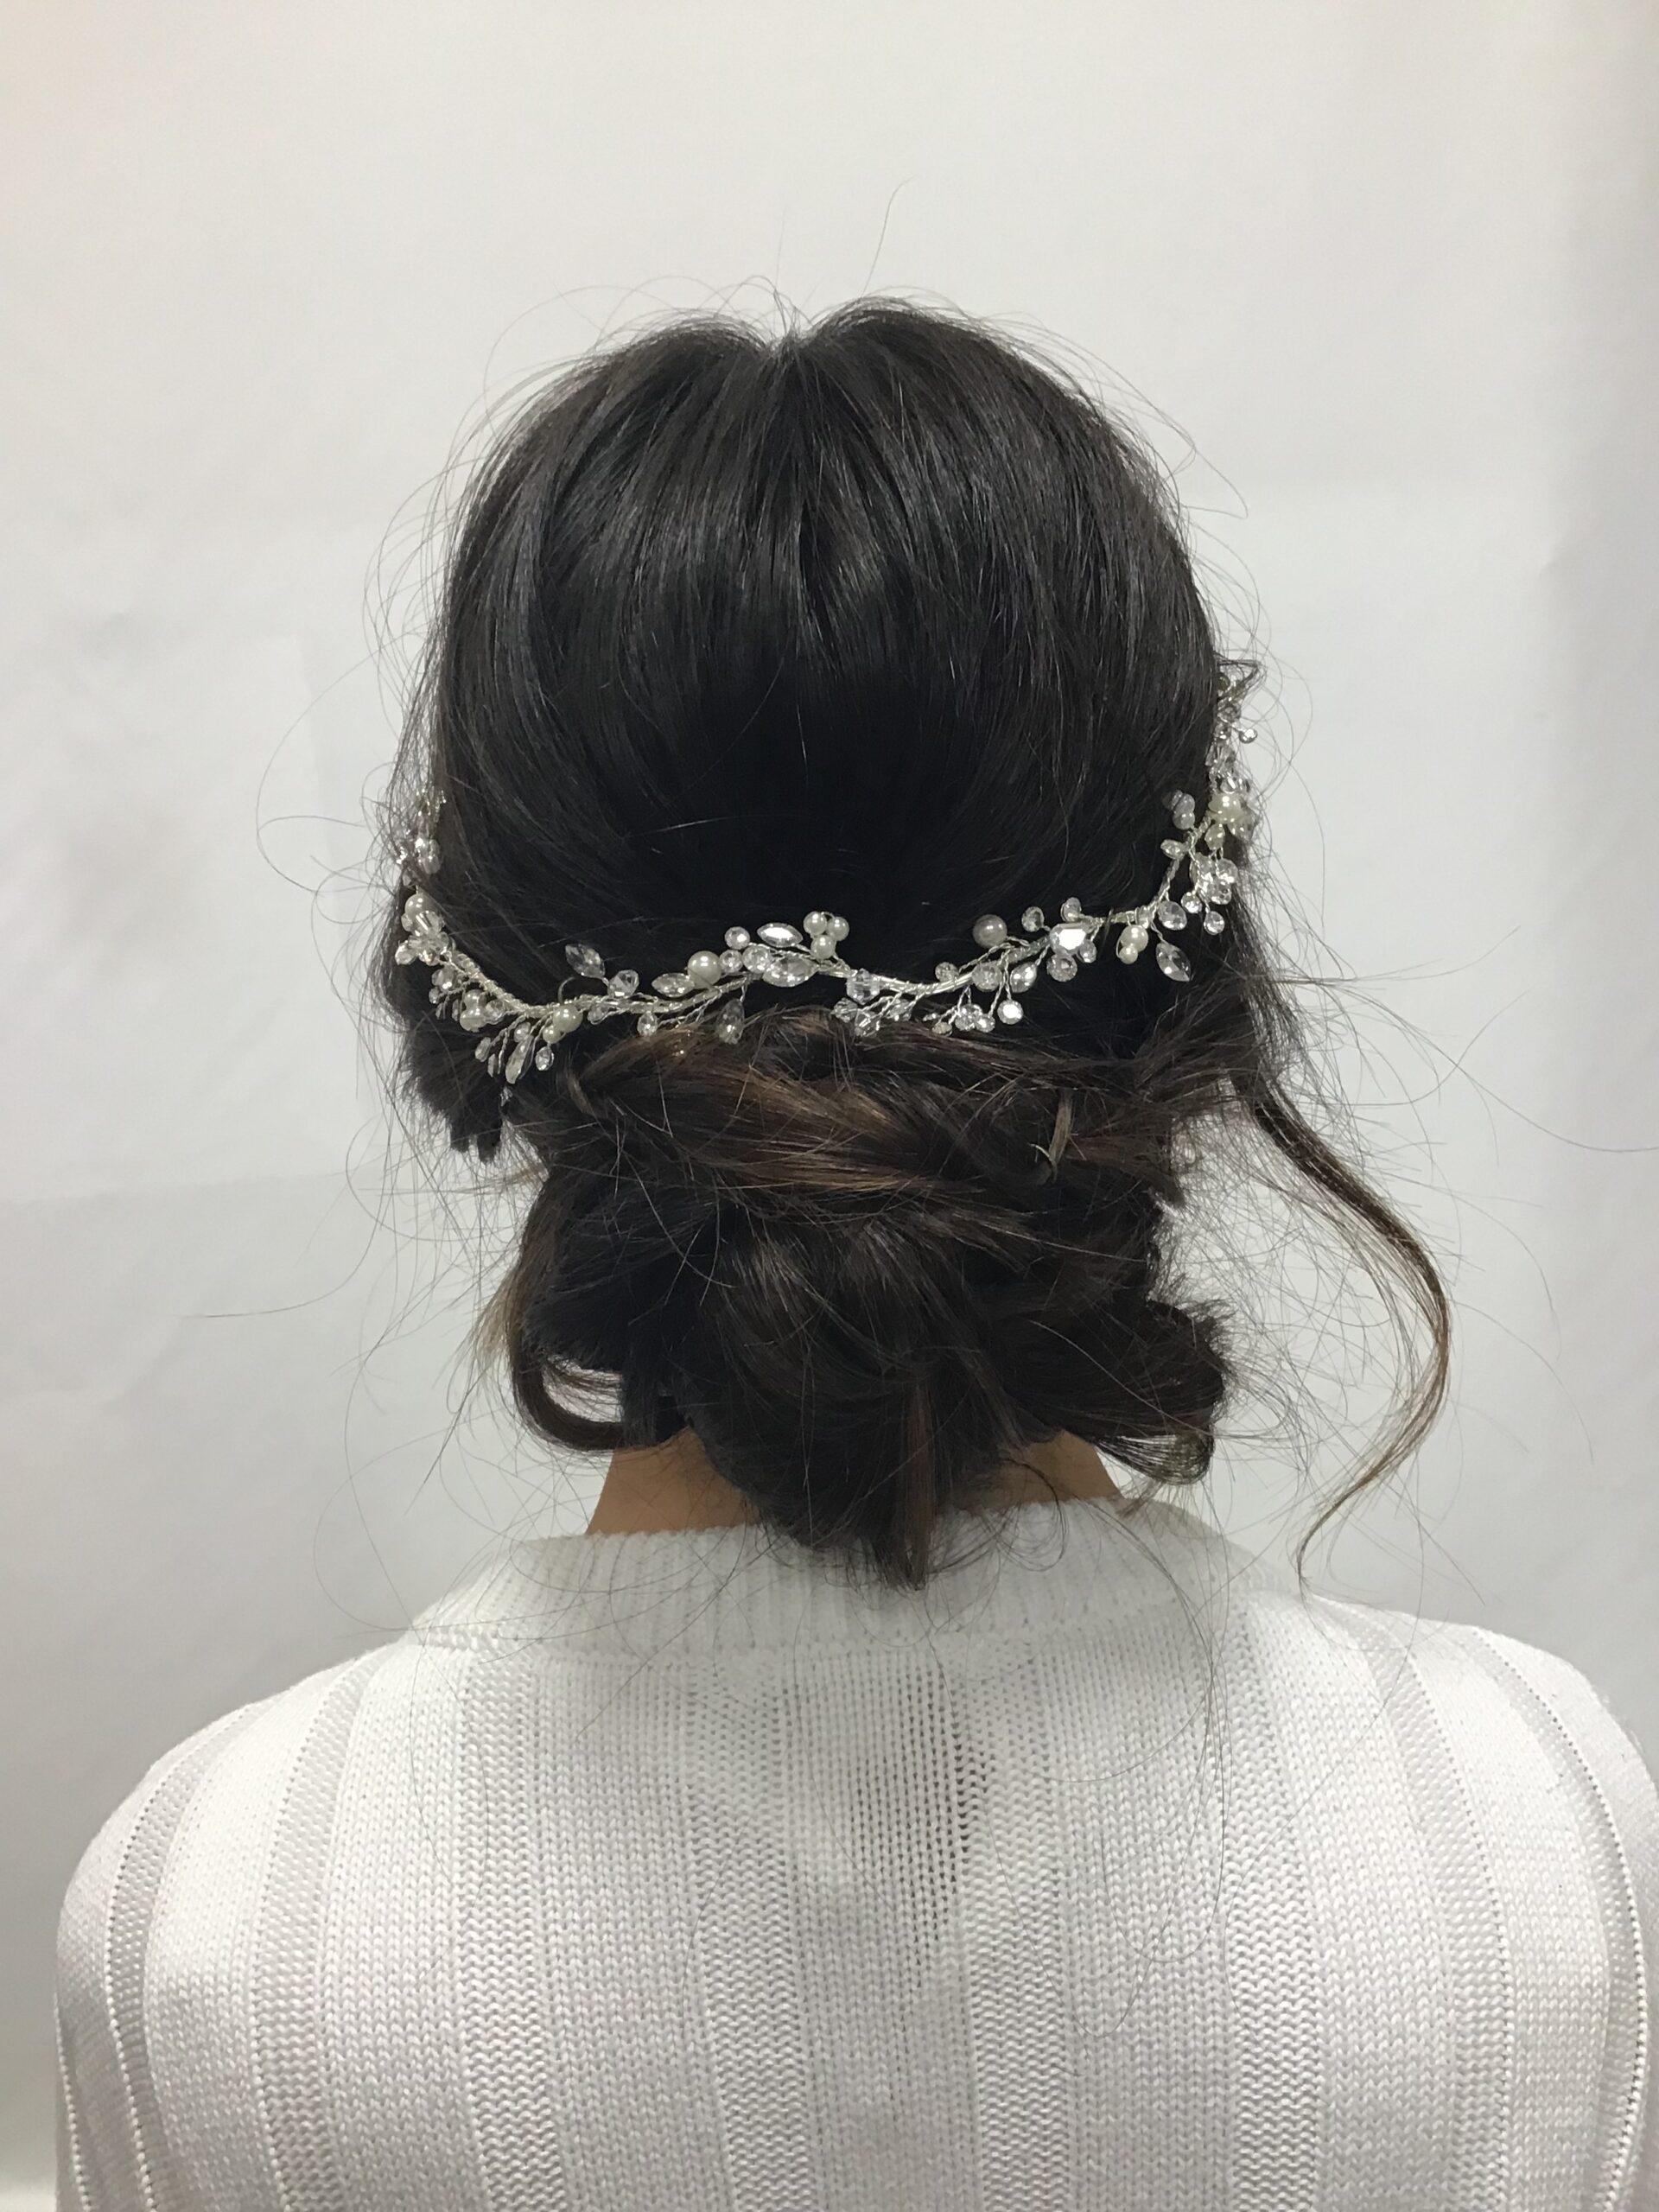 PARLAccessories Silver Crystal Headband for Wedding - Bridal Hair Jewellery  Hair Band Price in India - Buy PARLAccessories Silver Crystal Headband for  Wedding - Bridal Hair Jewellery Hair Band online at Flipkart.com